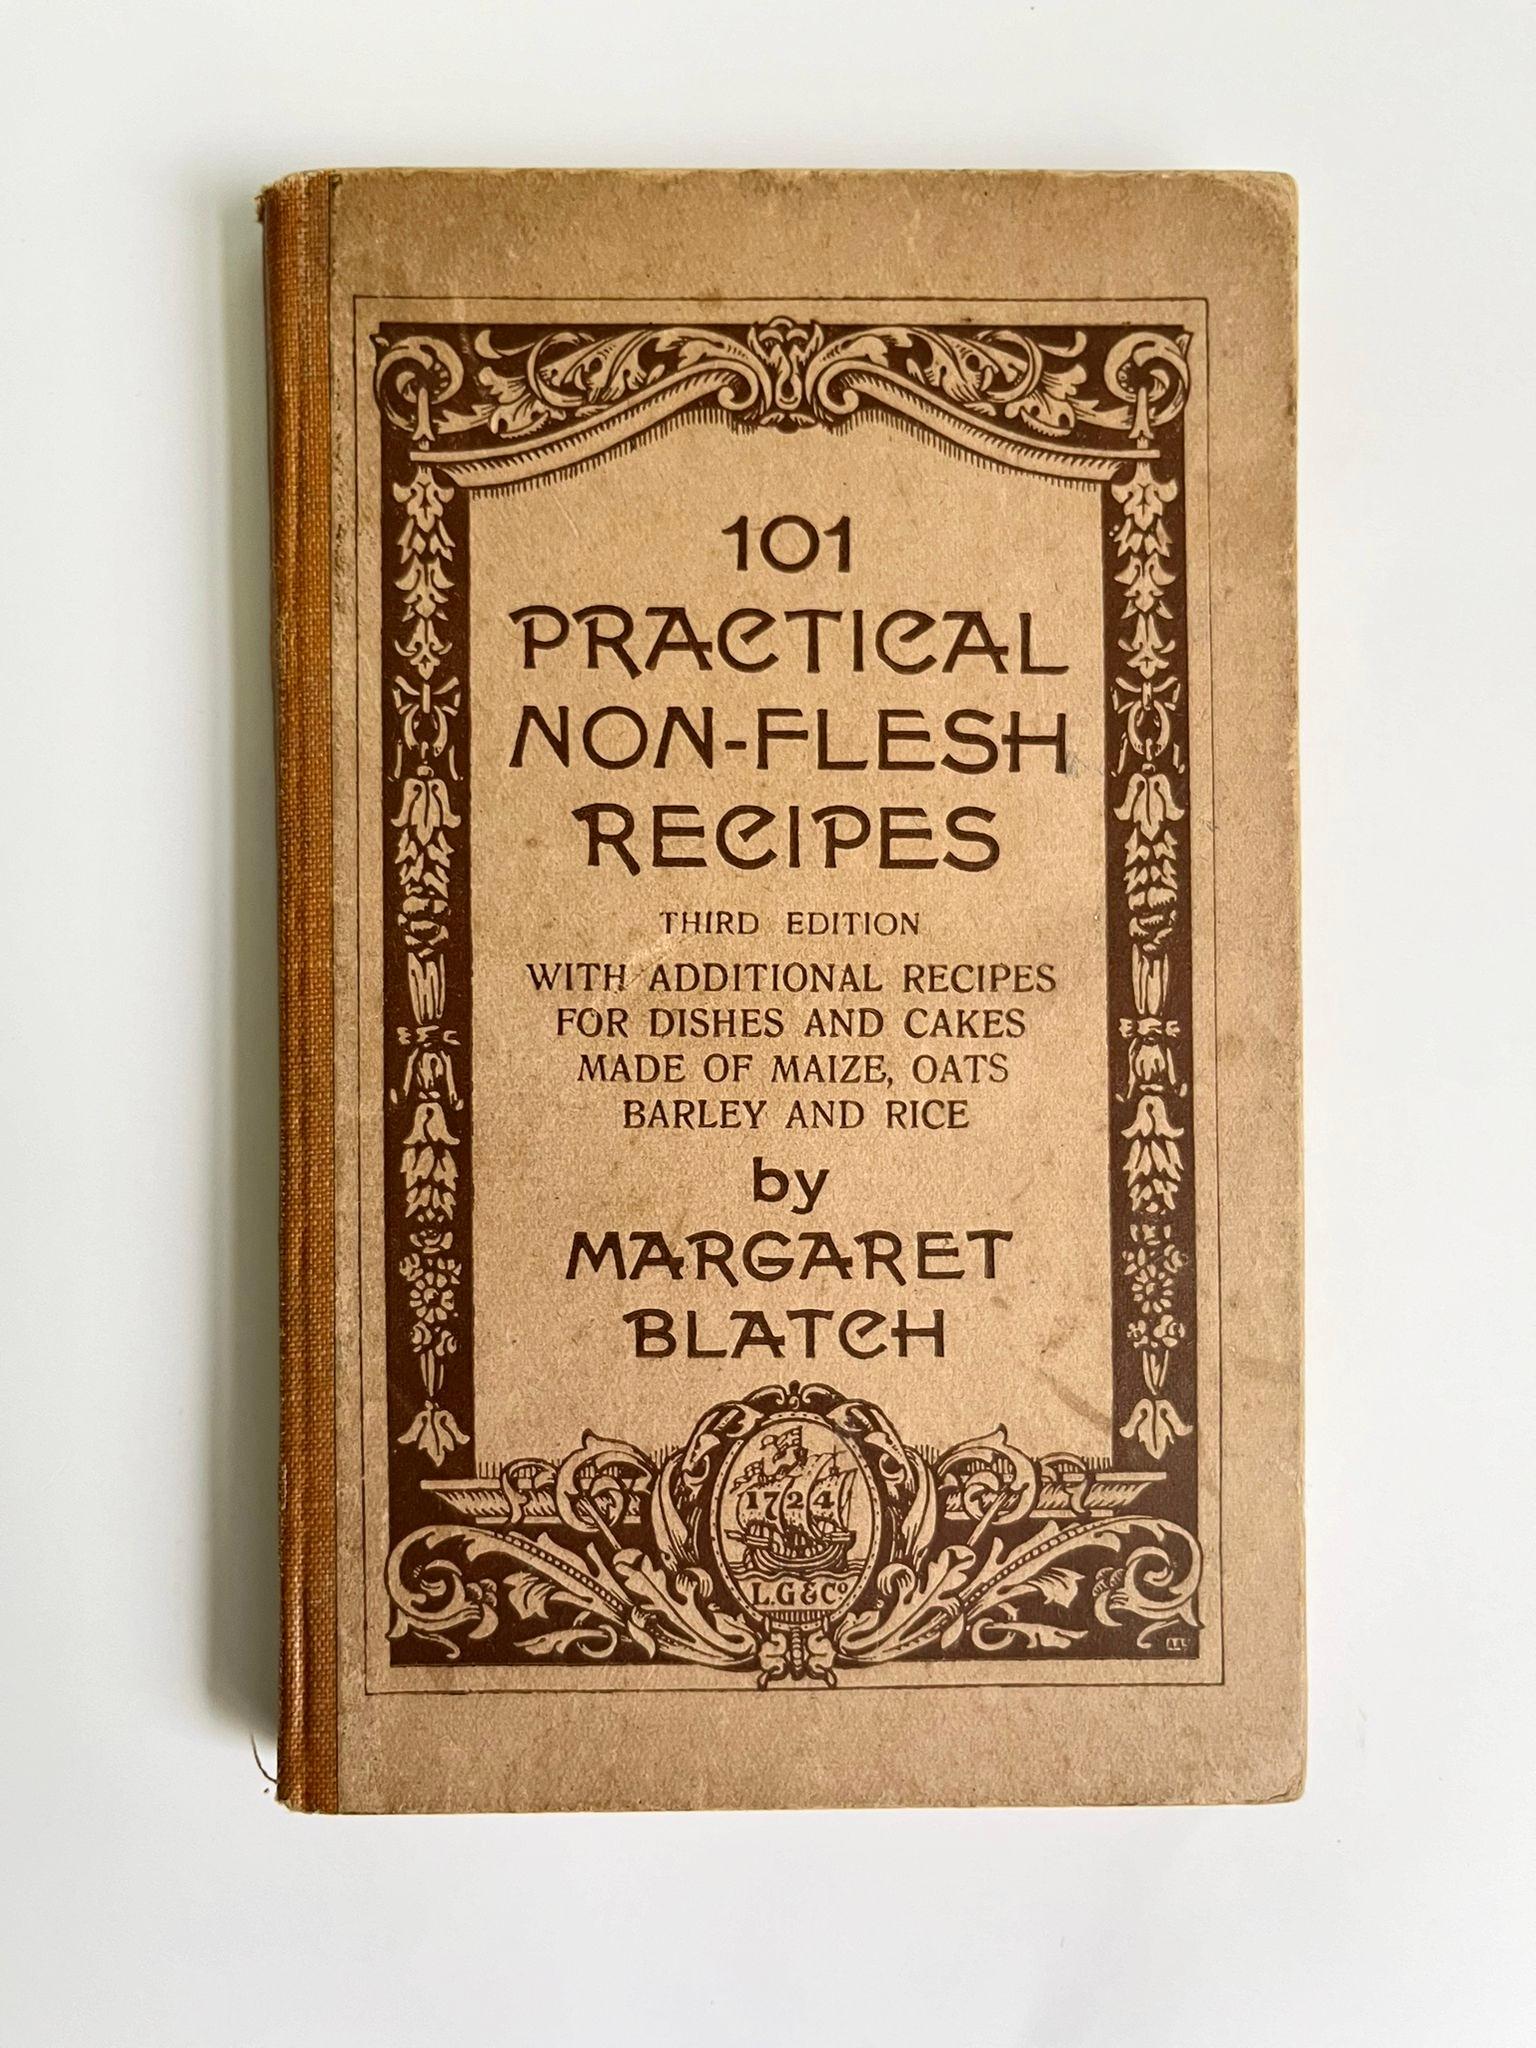 101 Practical Non-Flesh Recipes by Margaret Blatch